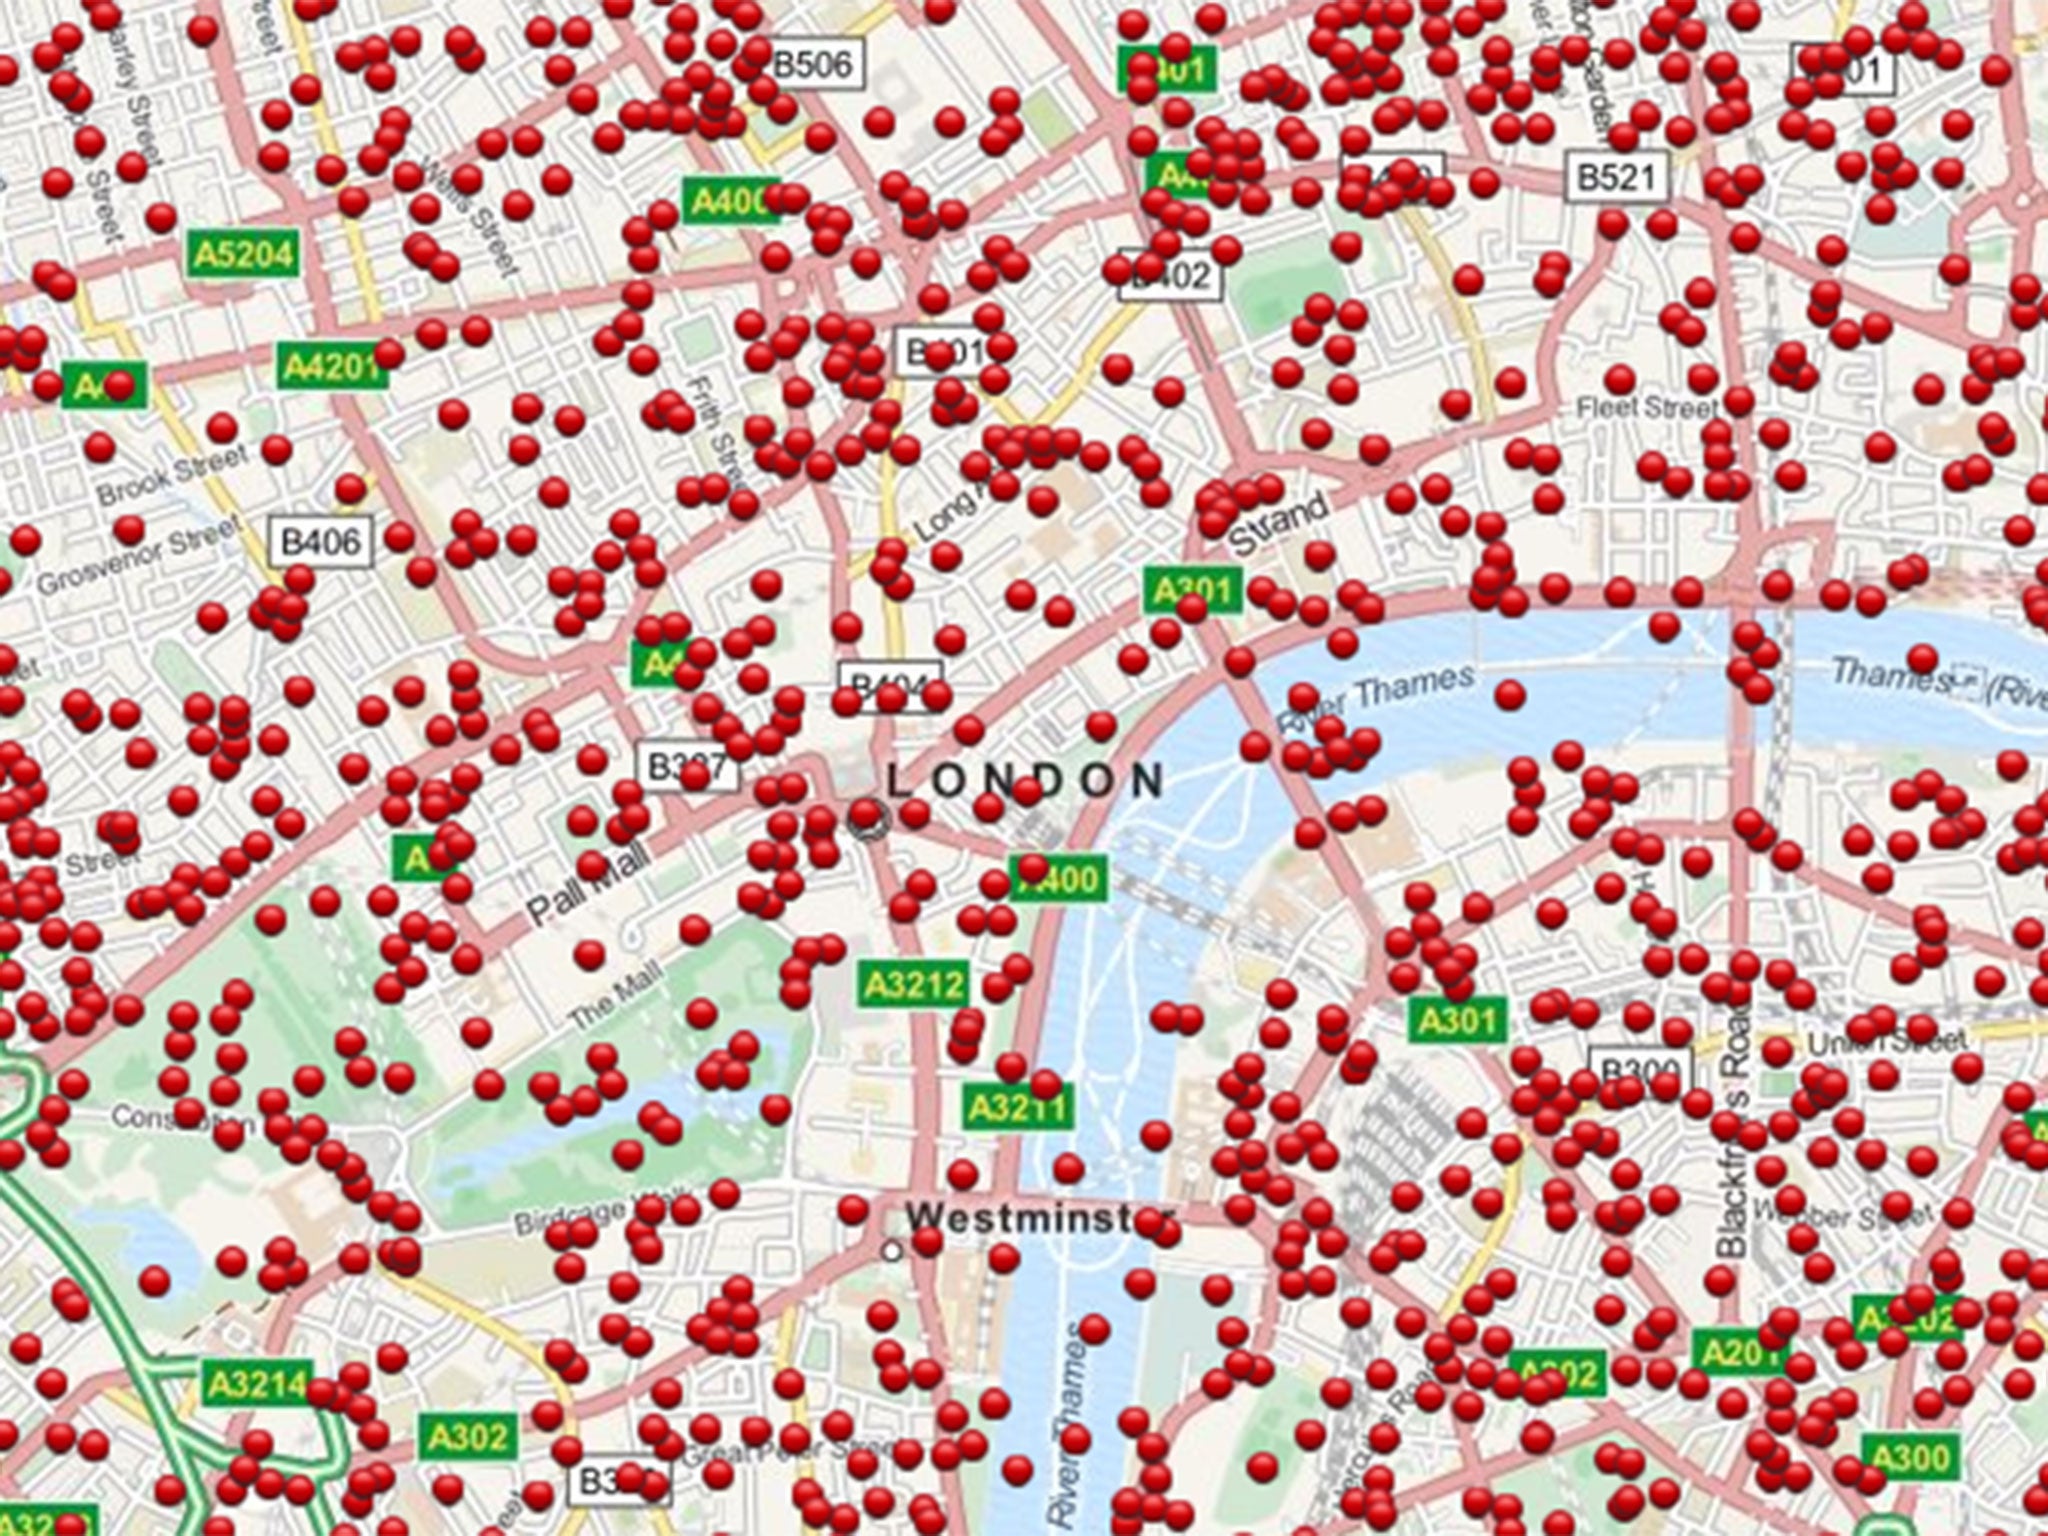 A map showing the locations of bombings in central London during the Blitz.